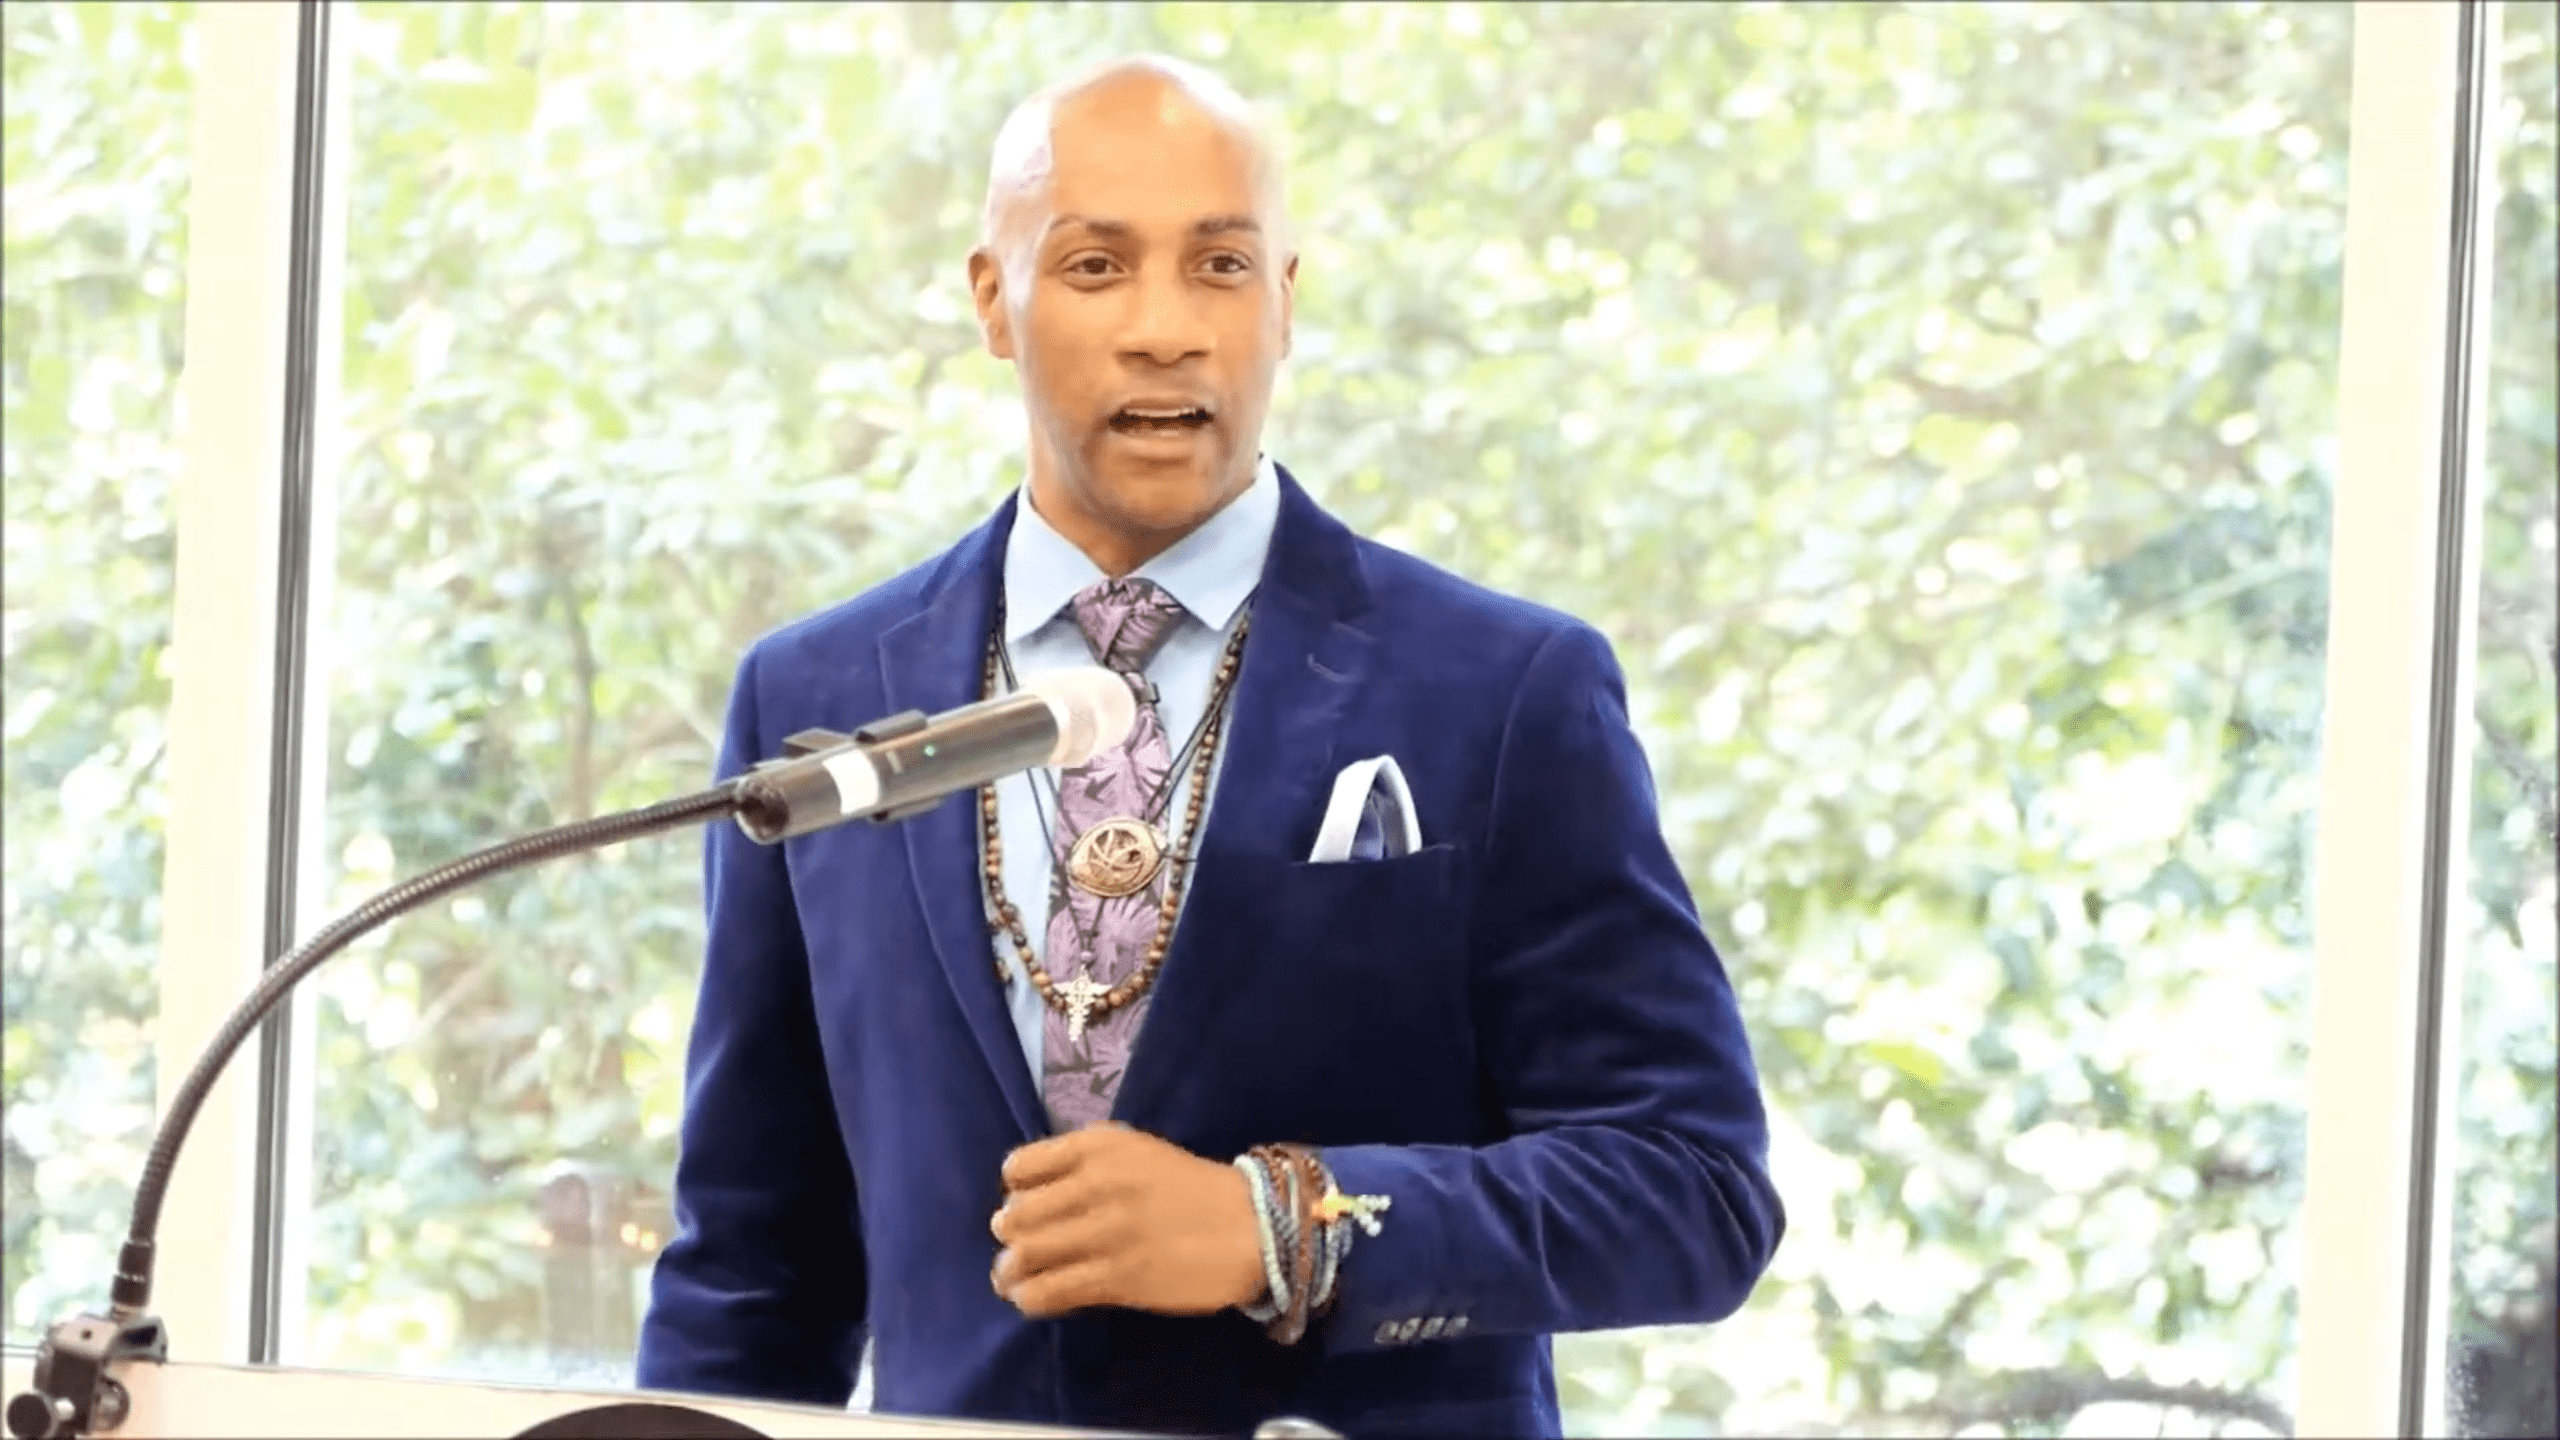 "X" Marks the Spot: "Intersectionality as Spiritual Practice" – Rev. Dr. Raymont Anderson